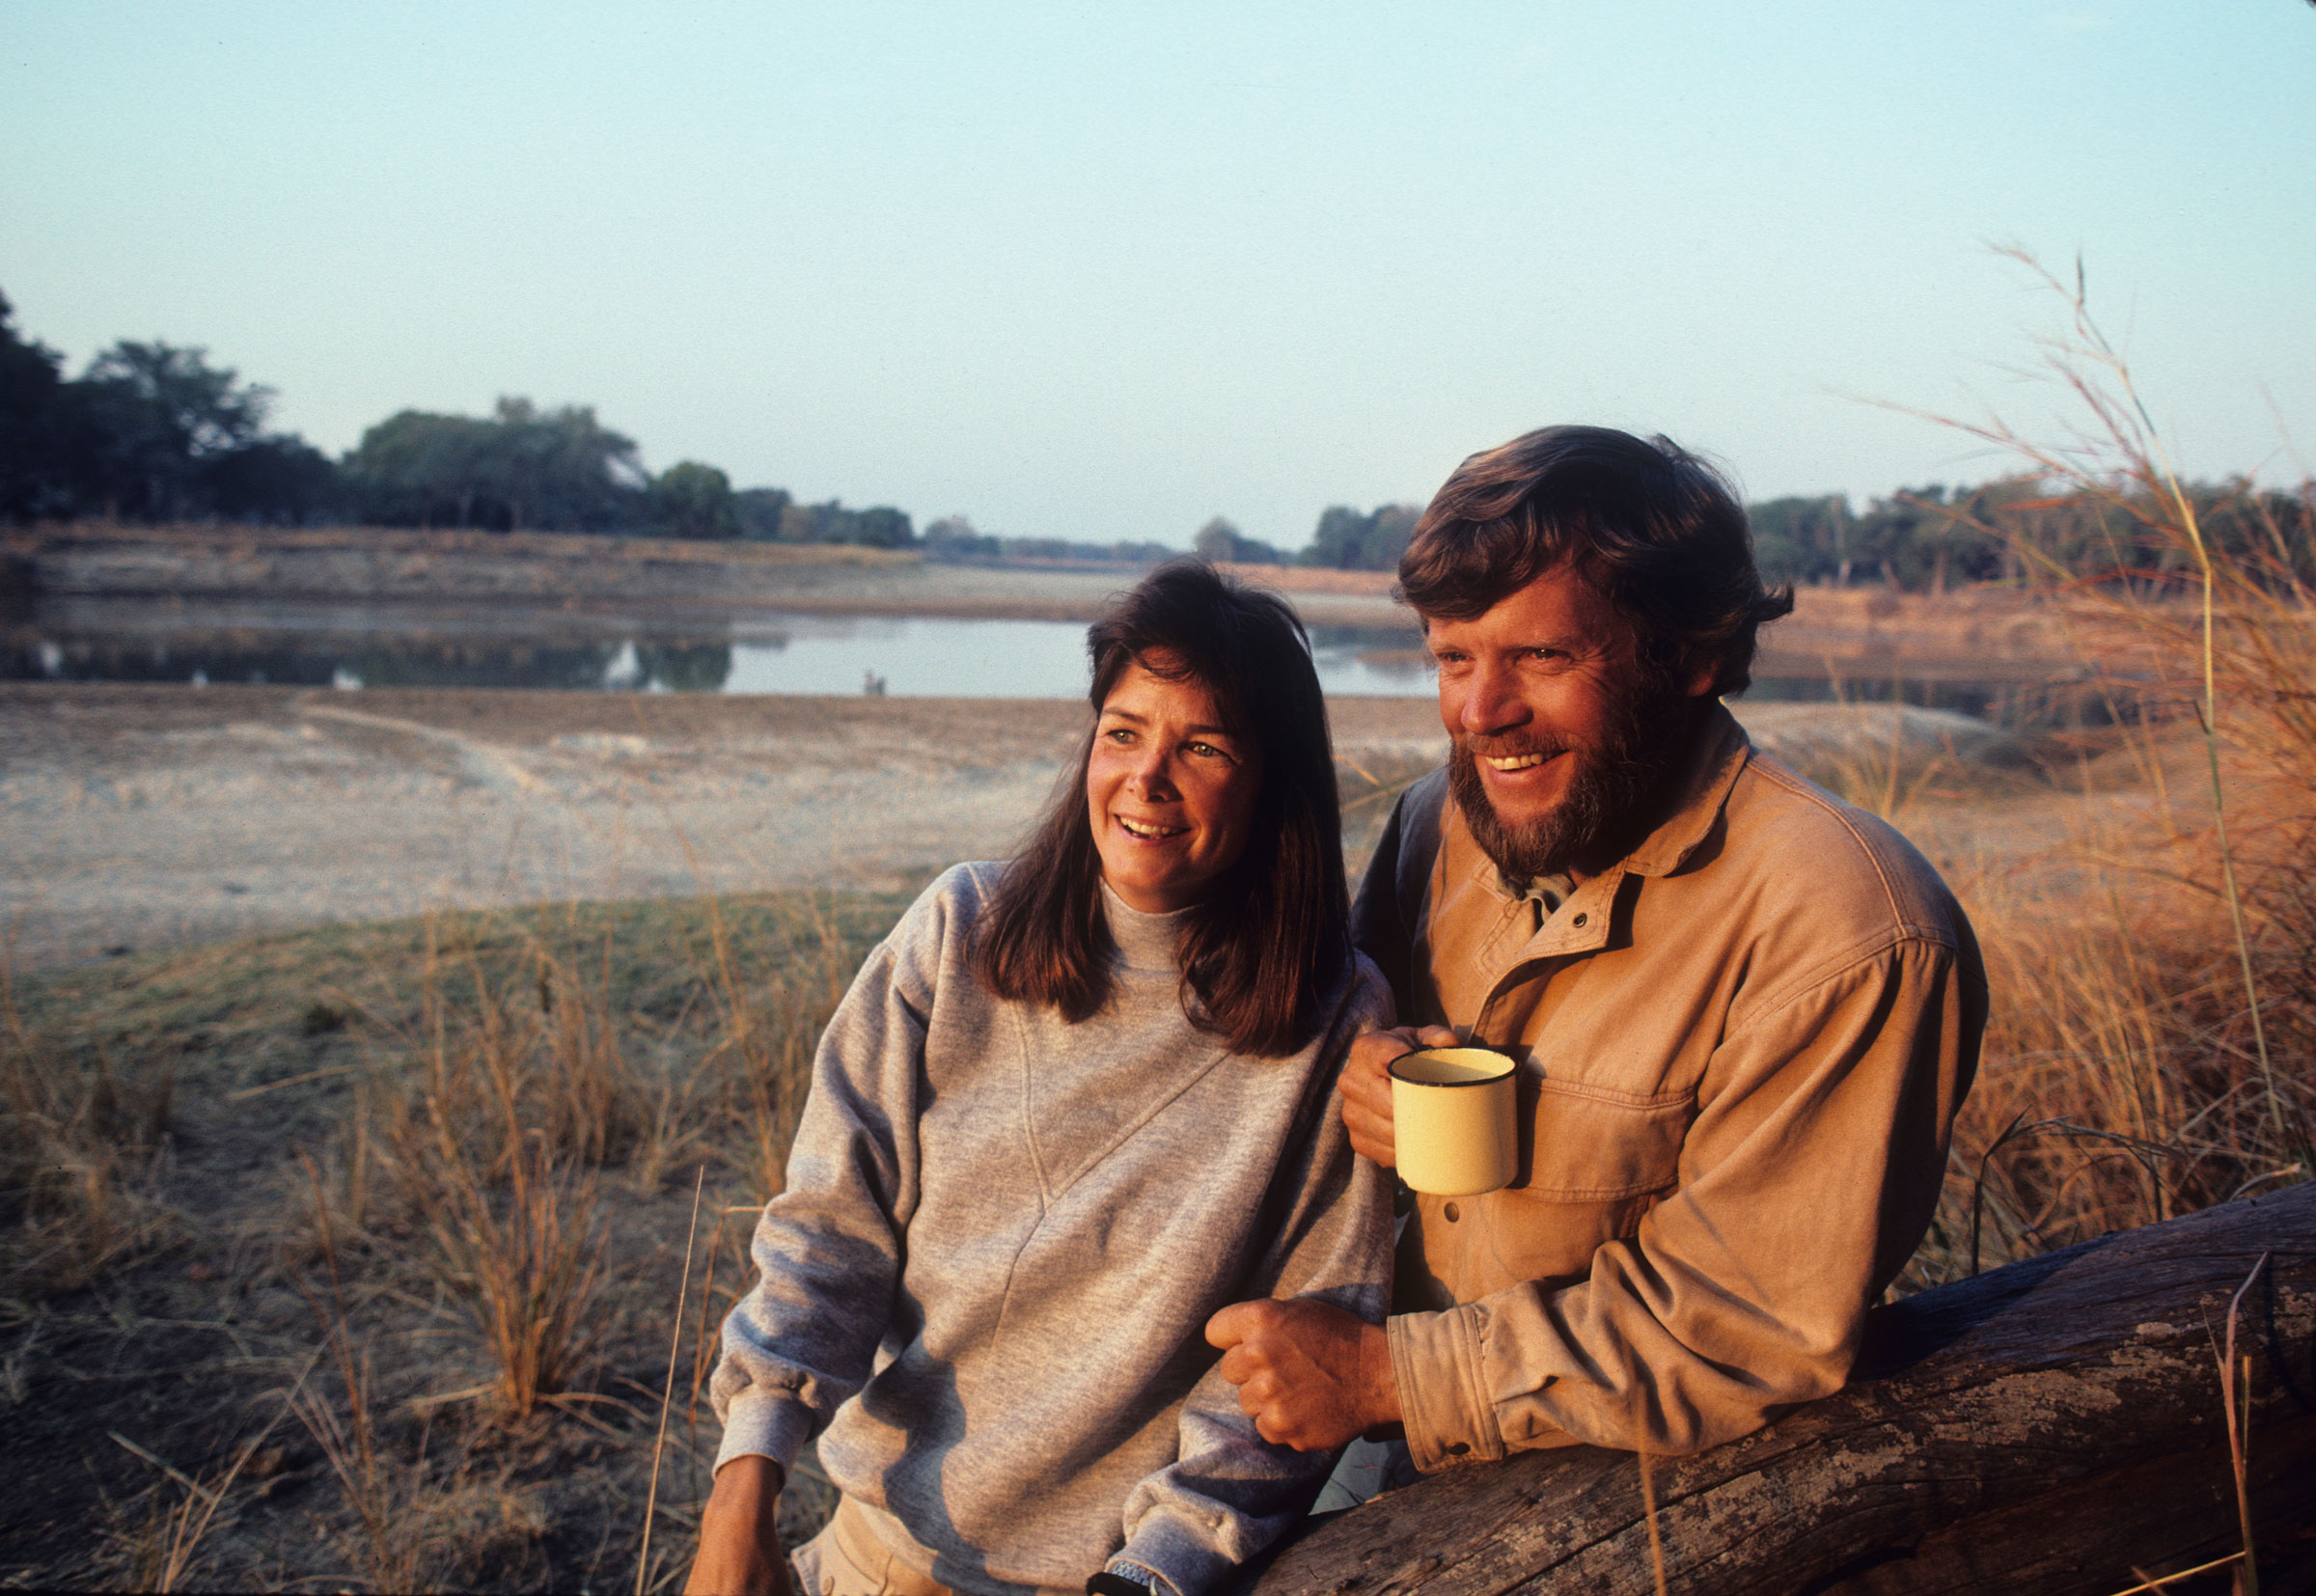 Mark and Delia Owens in the North Luangwa National Park in Zambia in Sept. 1990. (William Campbell—Corbis/Getty Images)